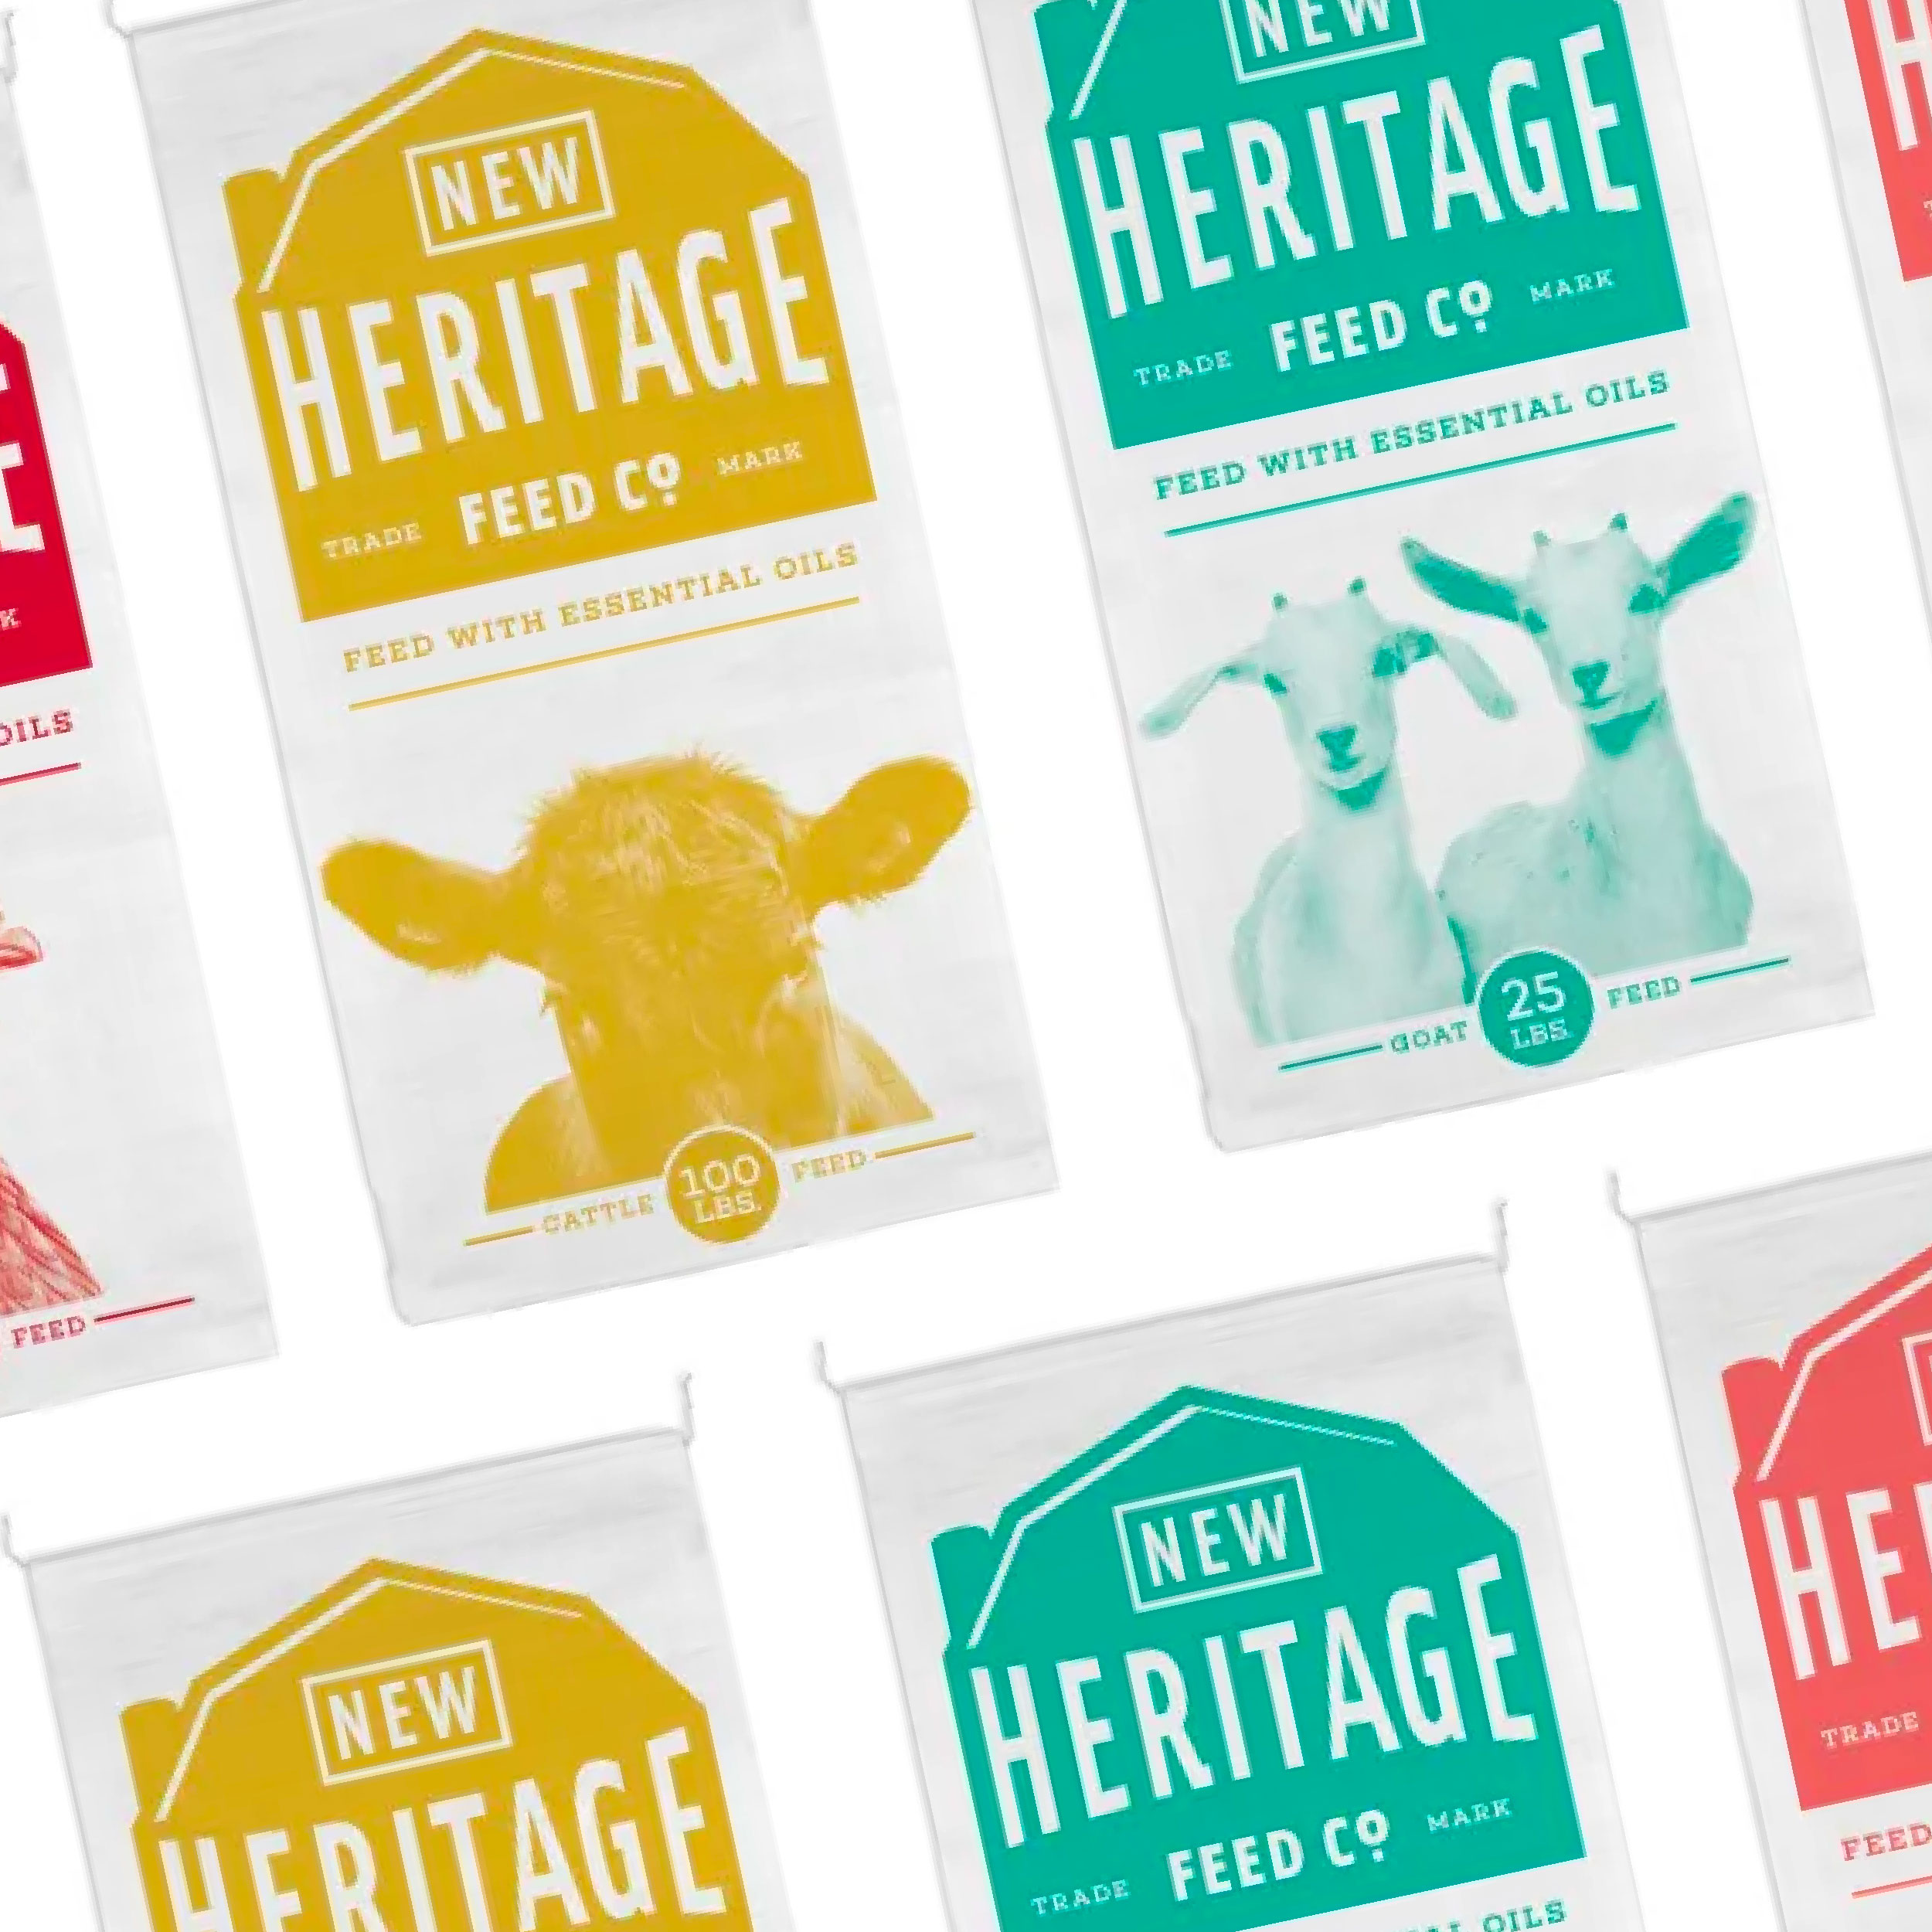 New Heritage Feed Co.